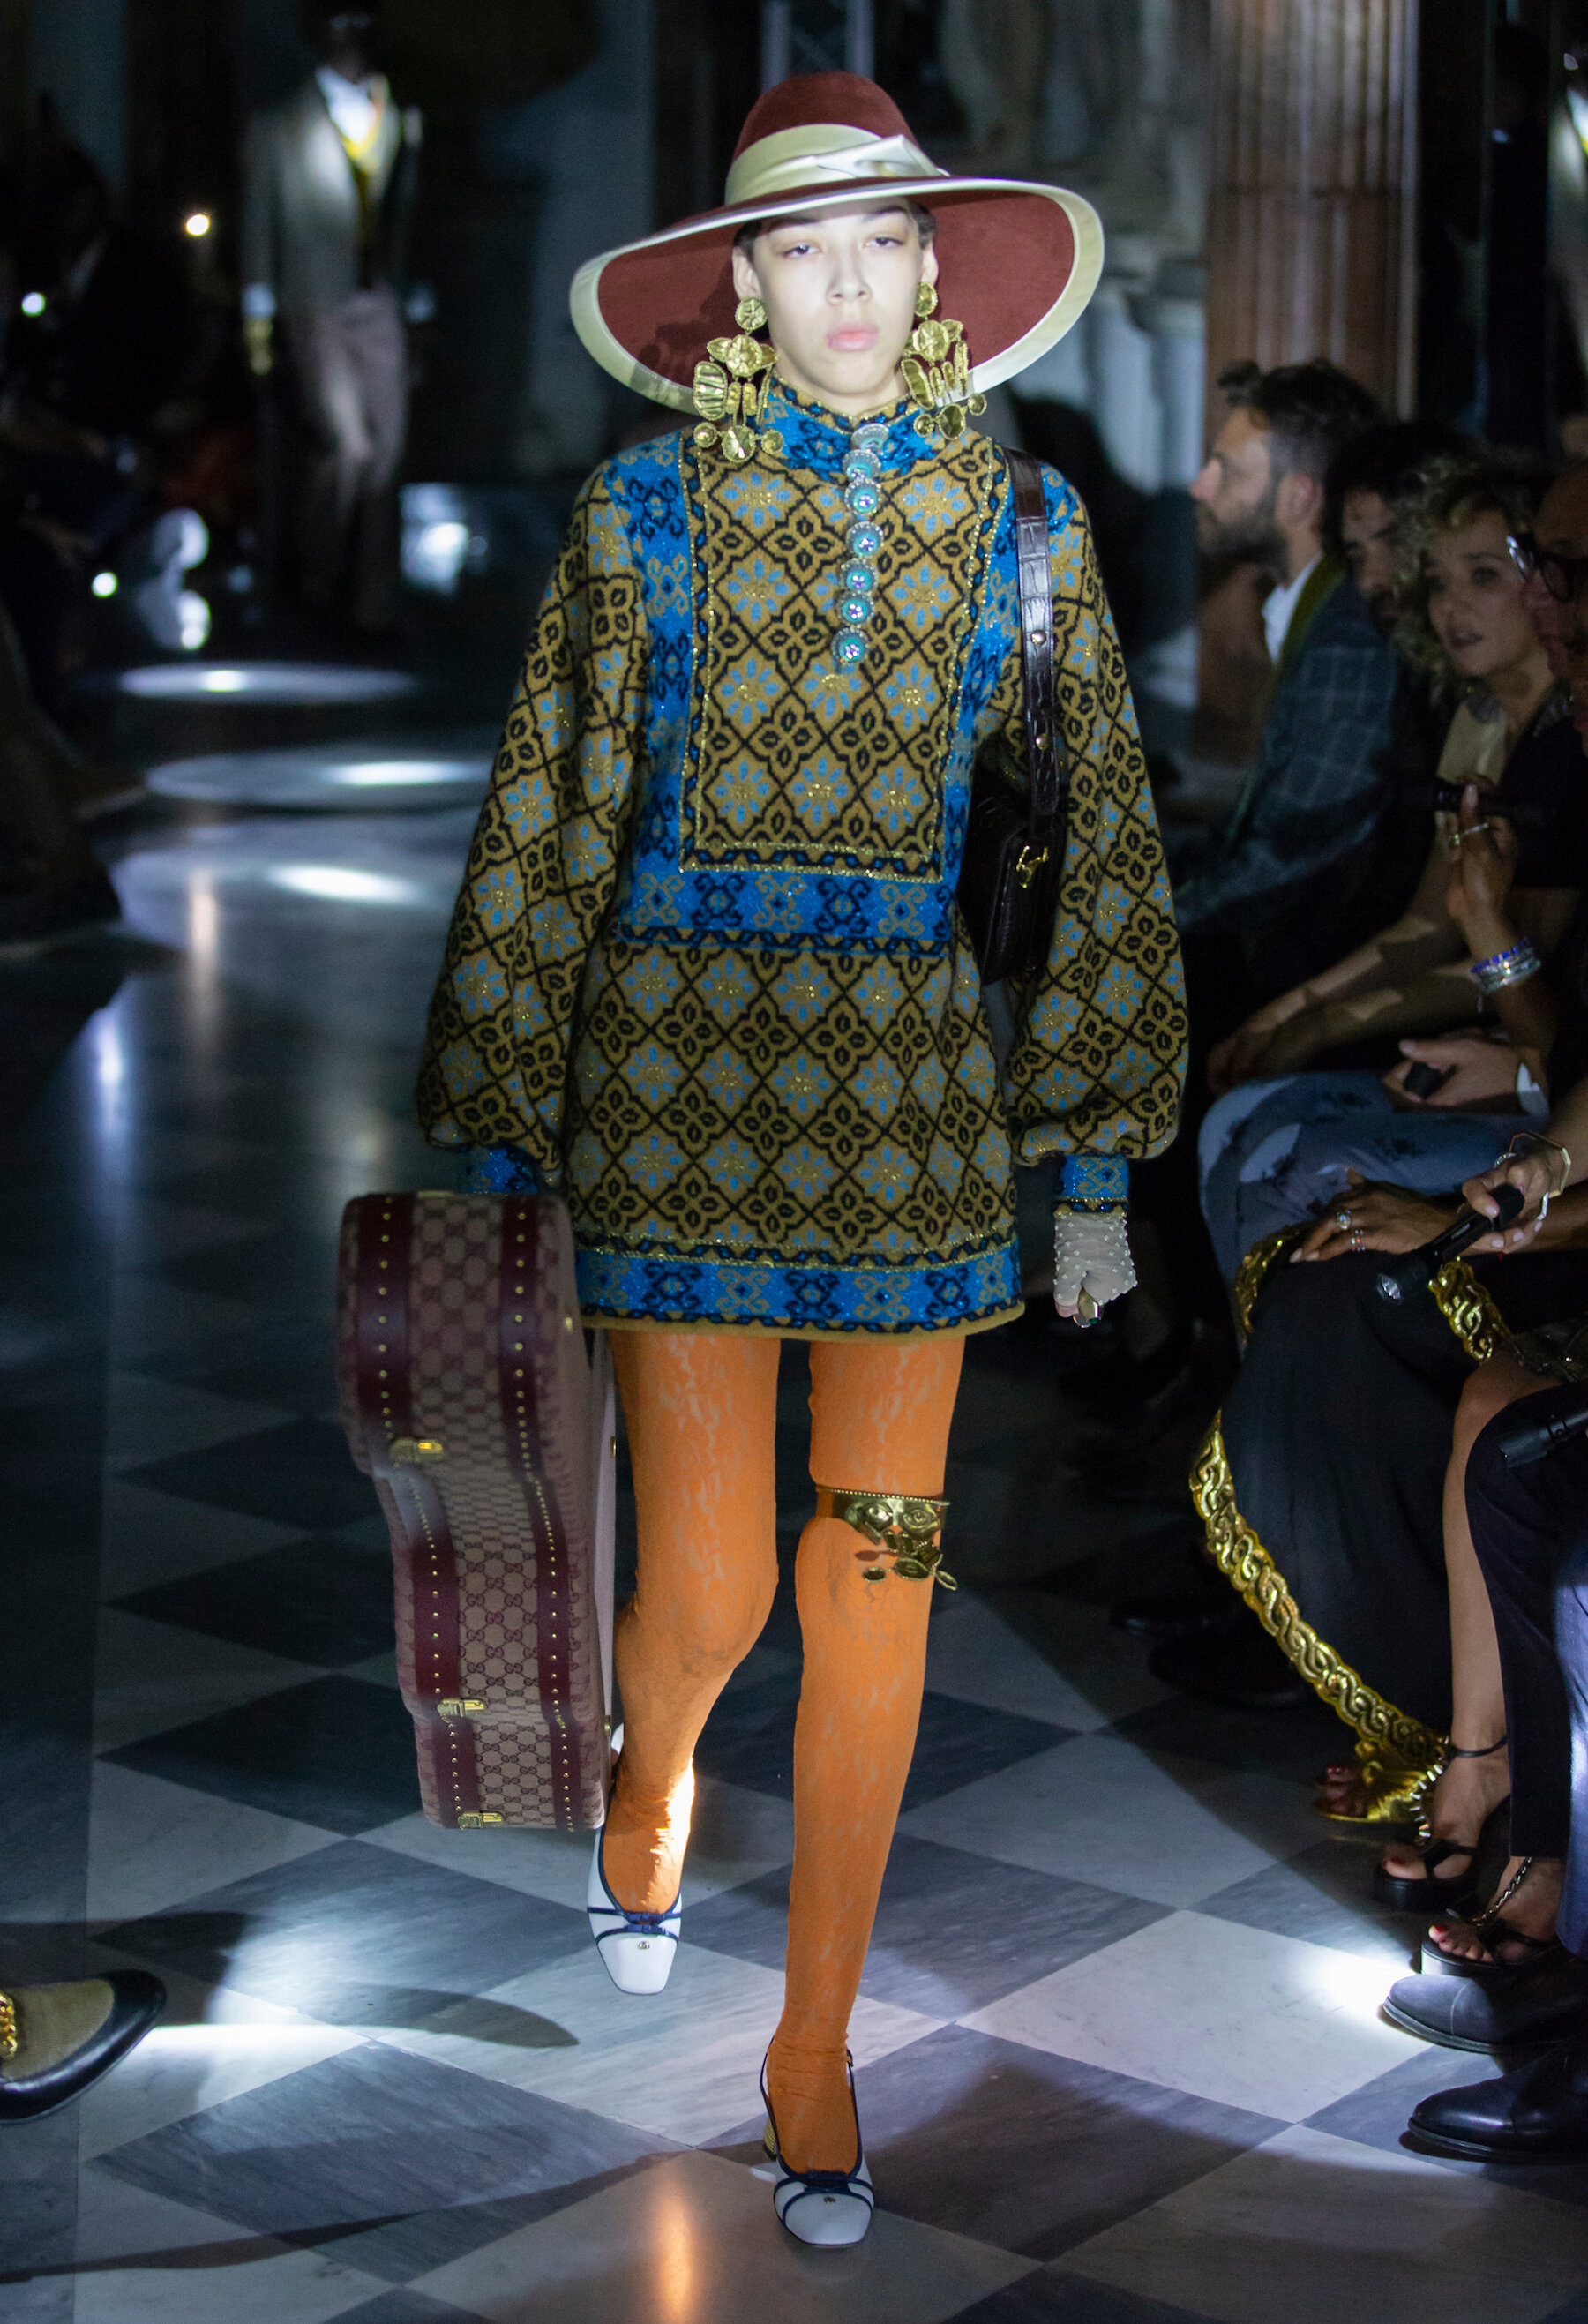 Gucci Cruise 2020 Collection (Look 39).jpg